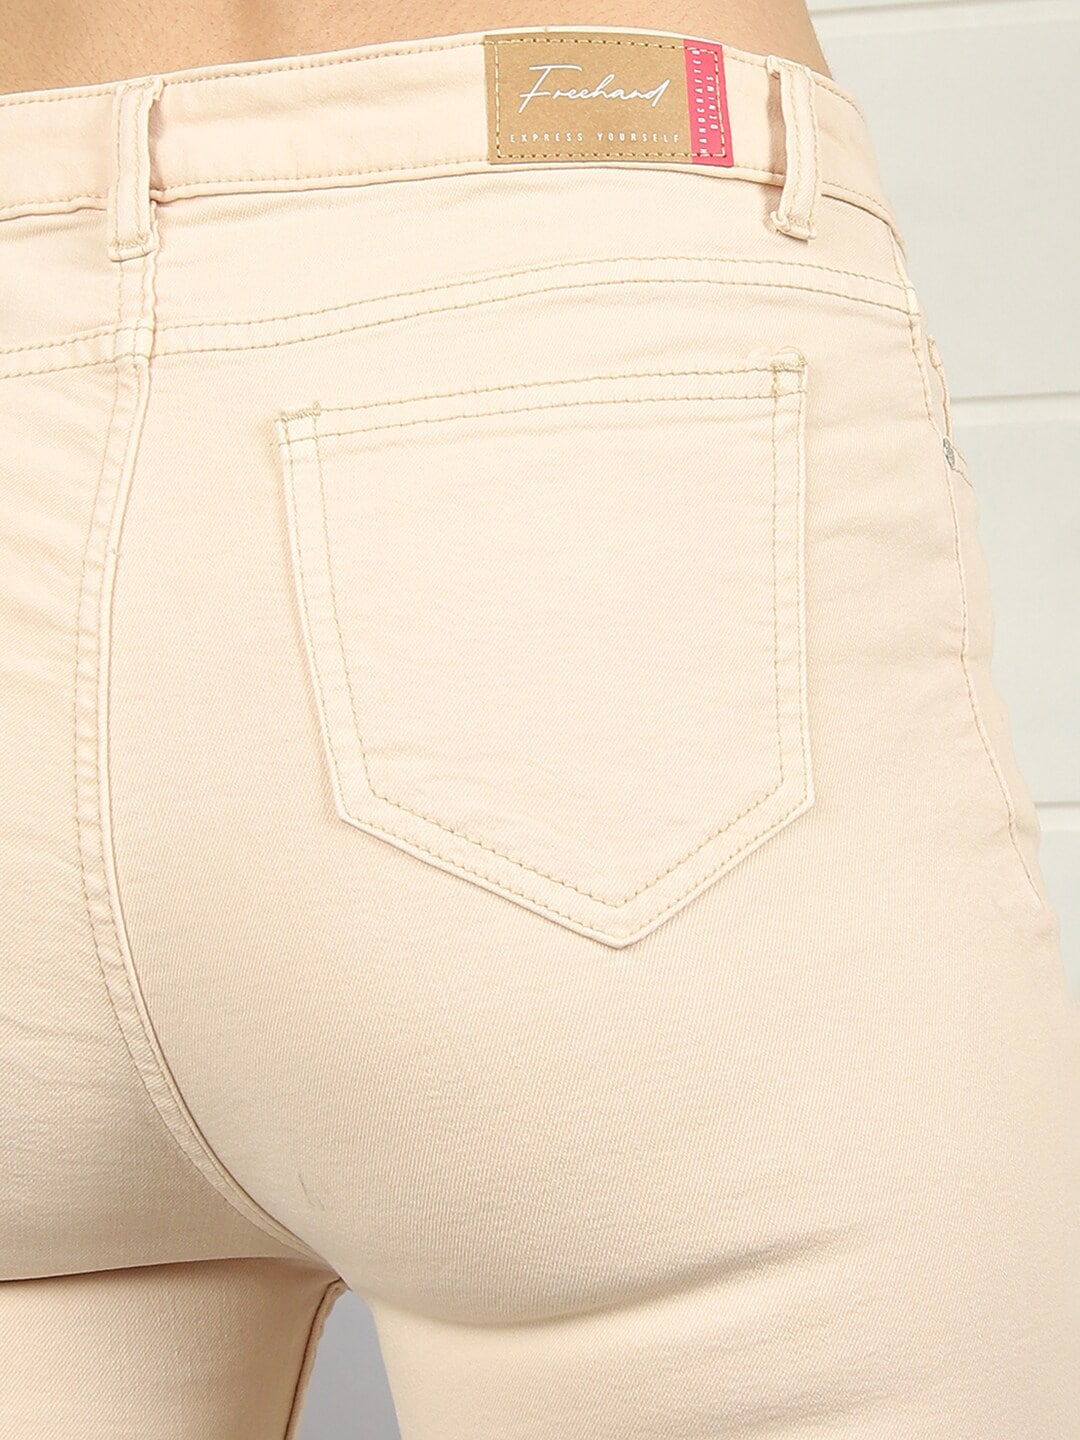 Shop Women Skinny Fit High-Rise Jeans Online.